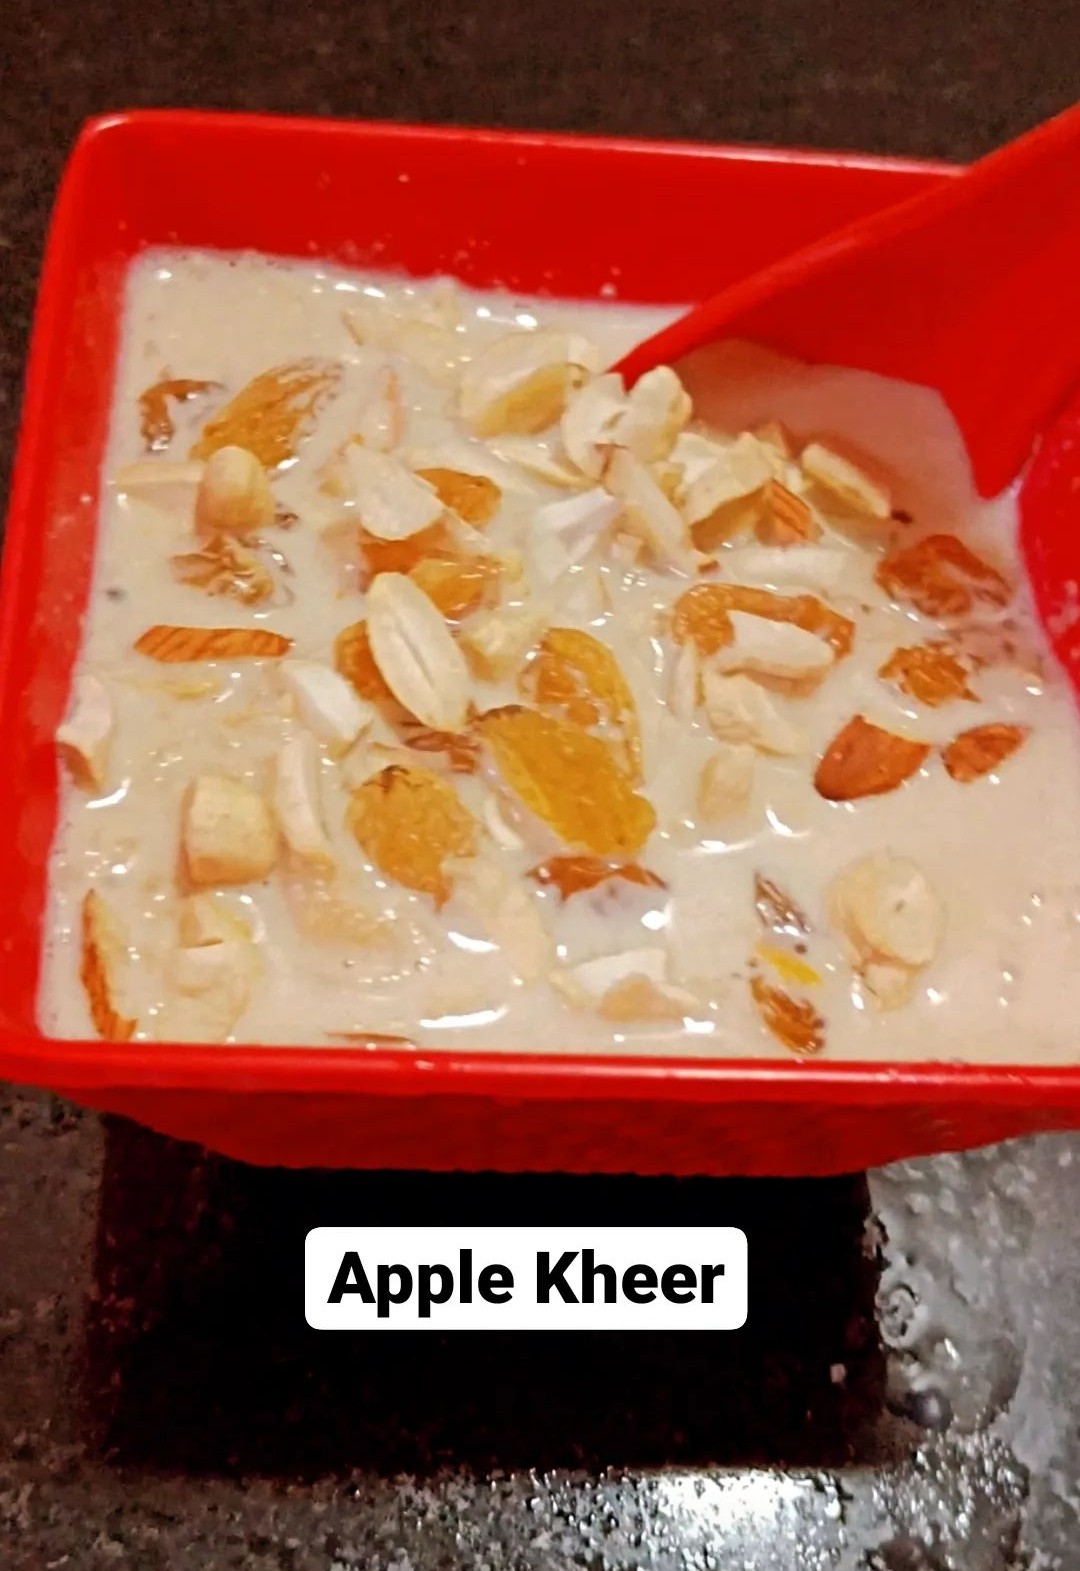 apple kheer to satiate your sweet tooth when you crave for sweet dishes